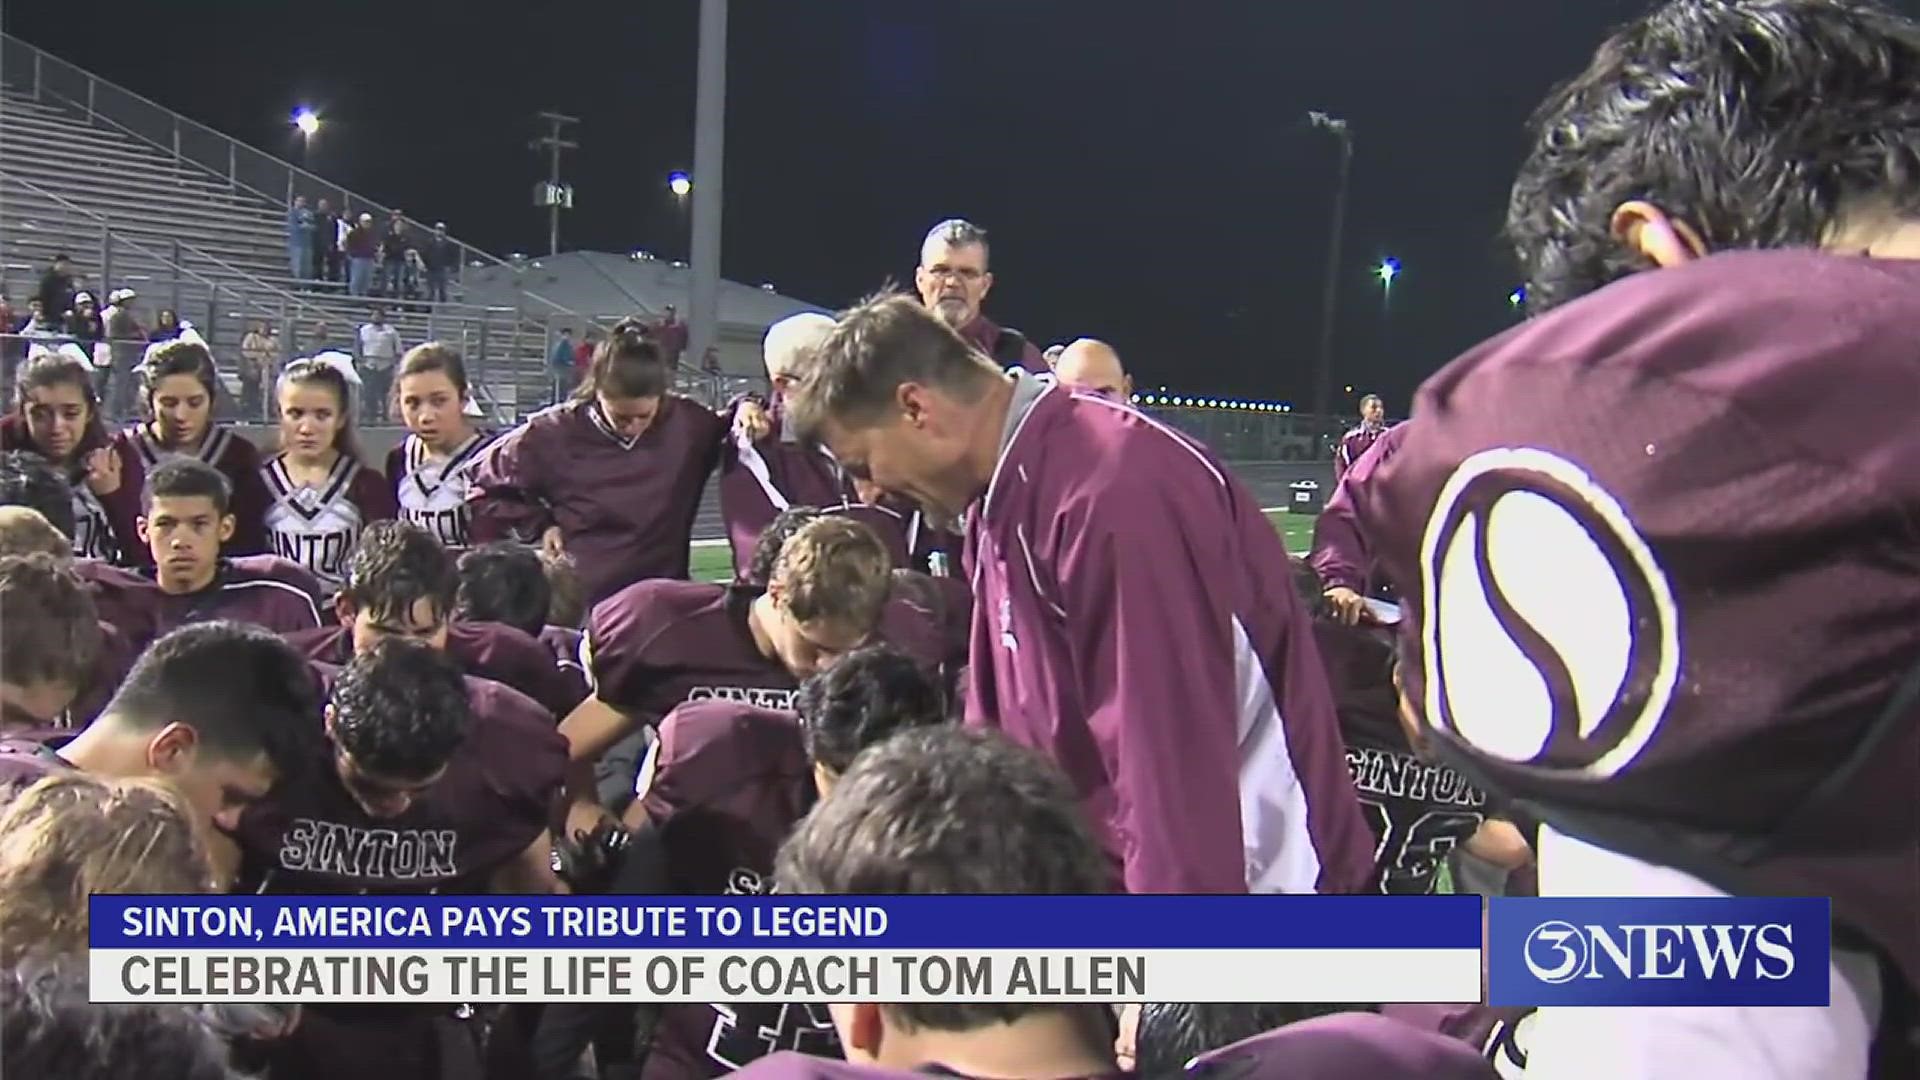 Friends to family. Coach Allen changed the lives of many.